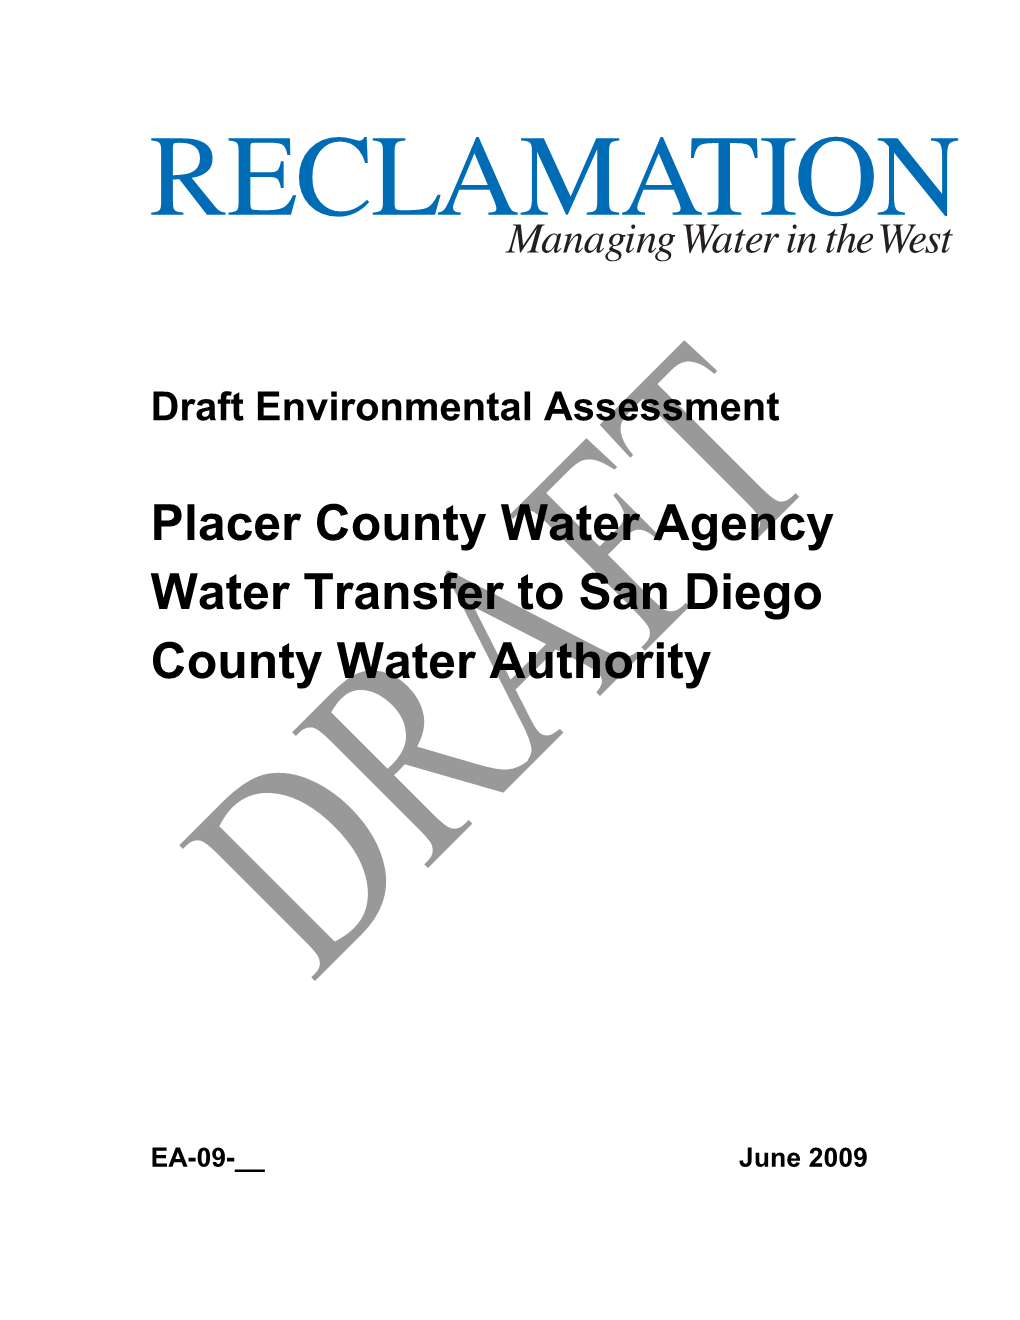 Placer County Water Agency Water Transfer to San Diego County Water Authority